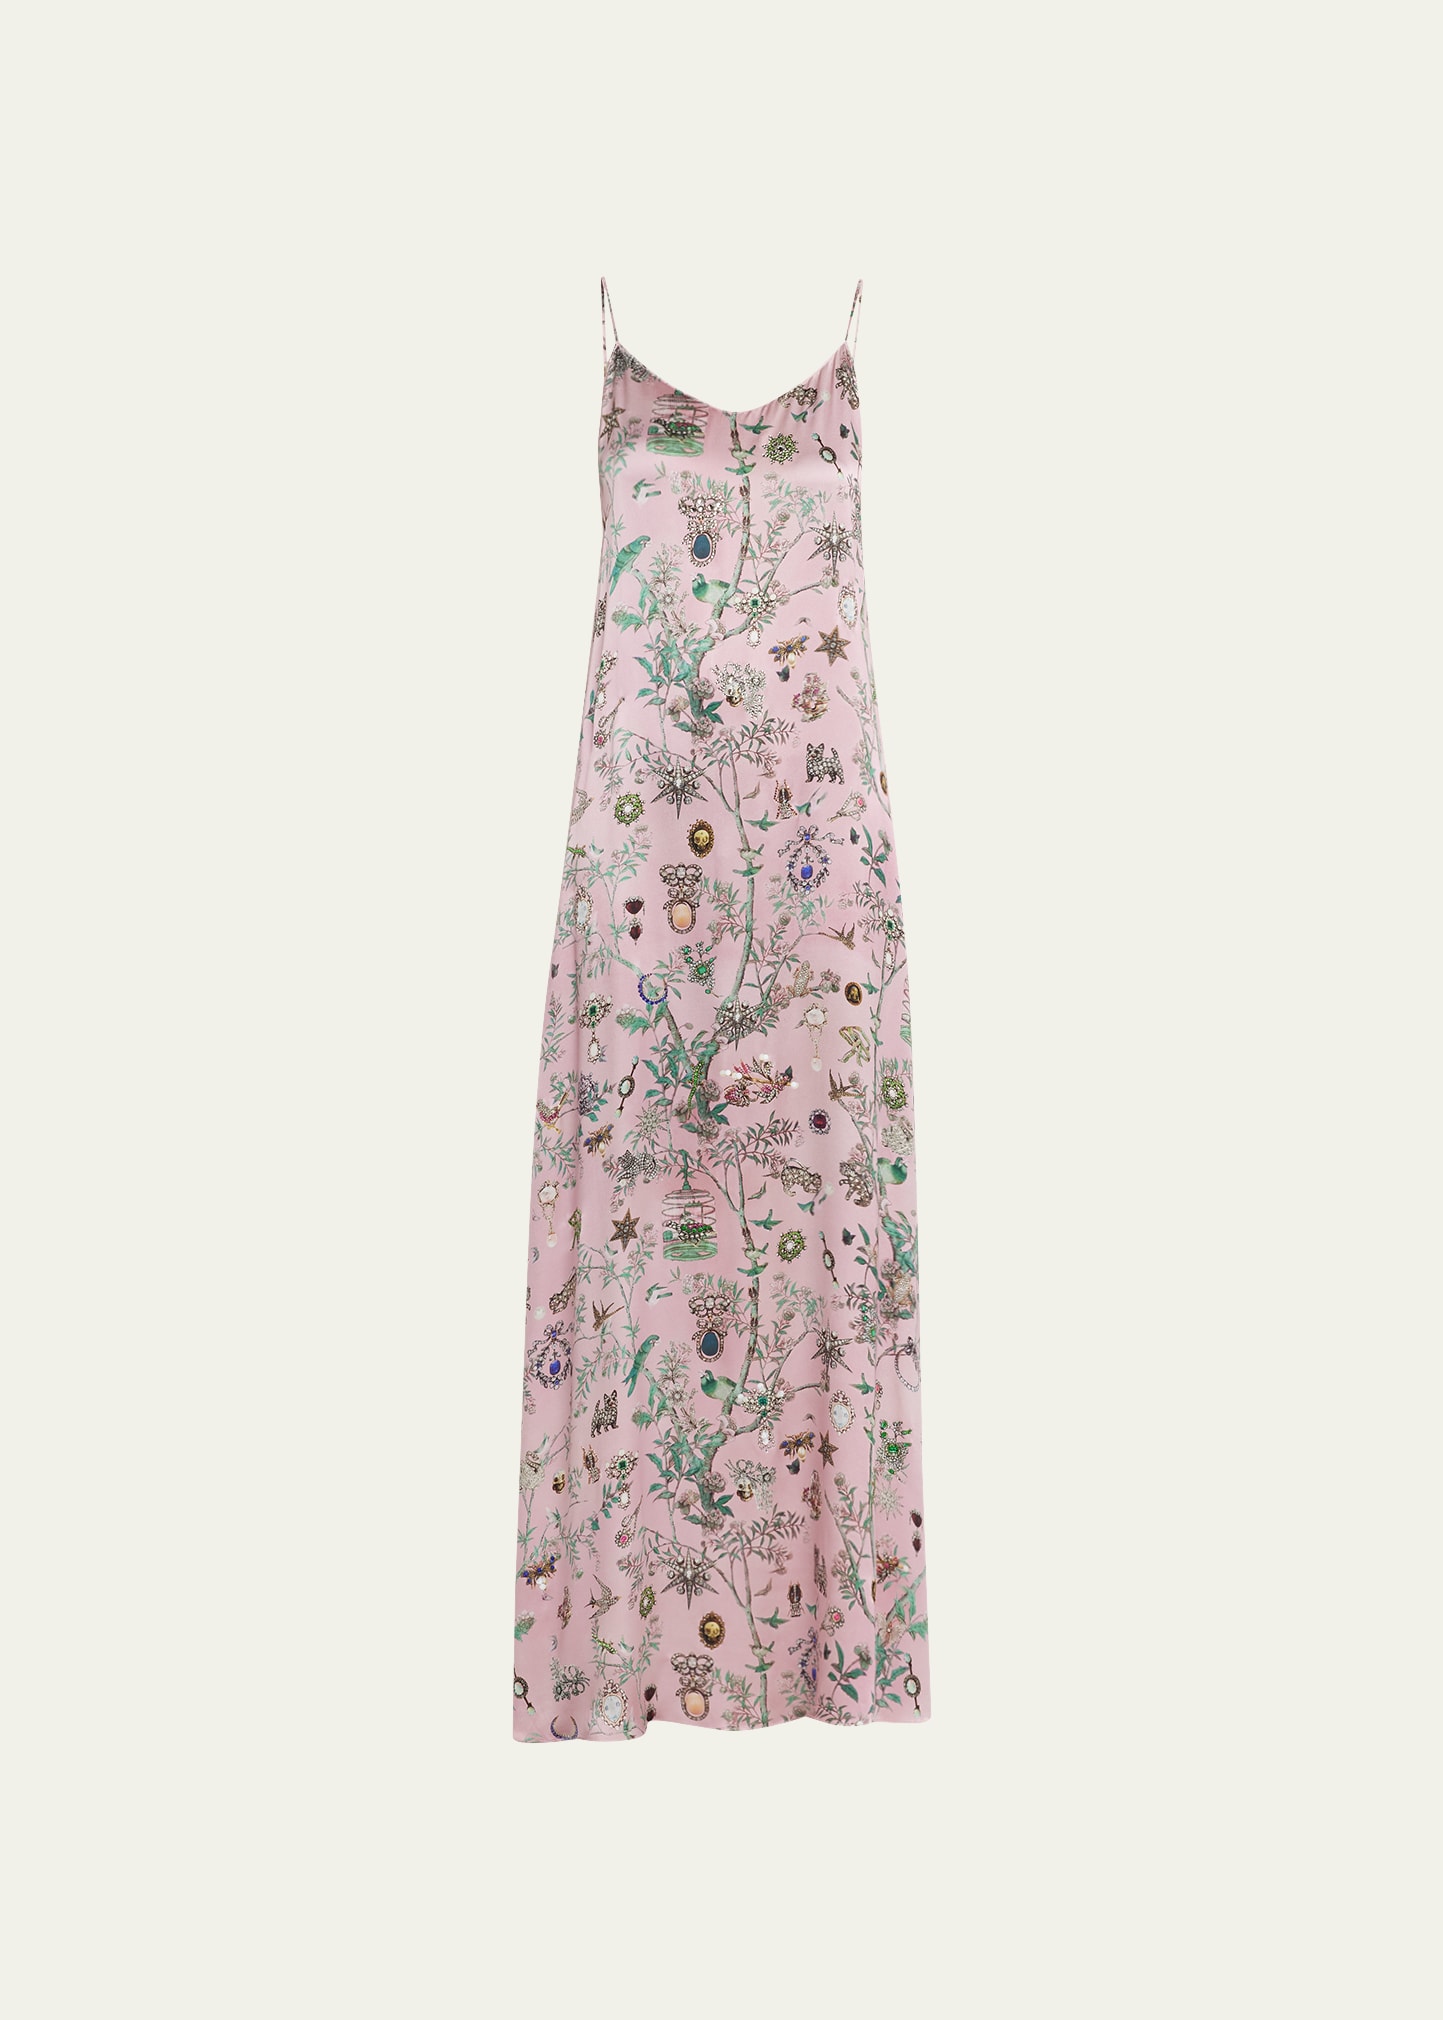 Libertine Pauline De Rothchild Classic Printed Slip Dress With Crystals In Pink Multi